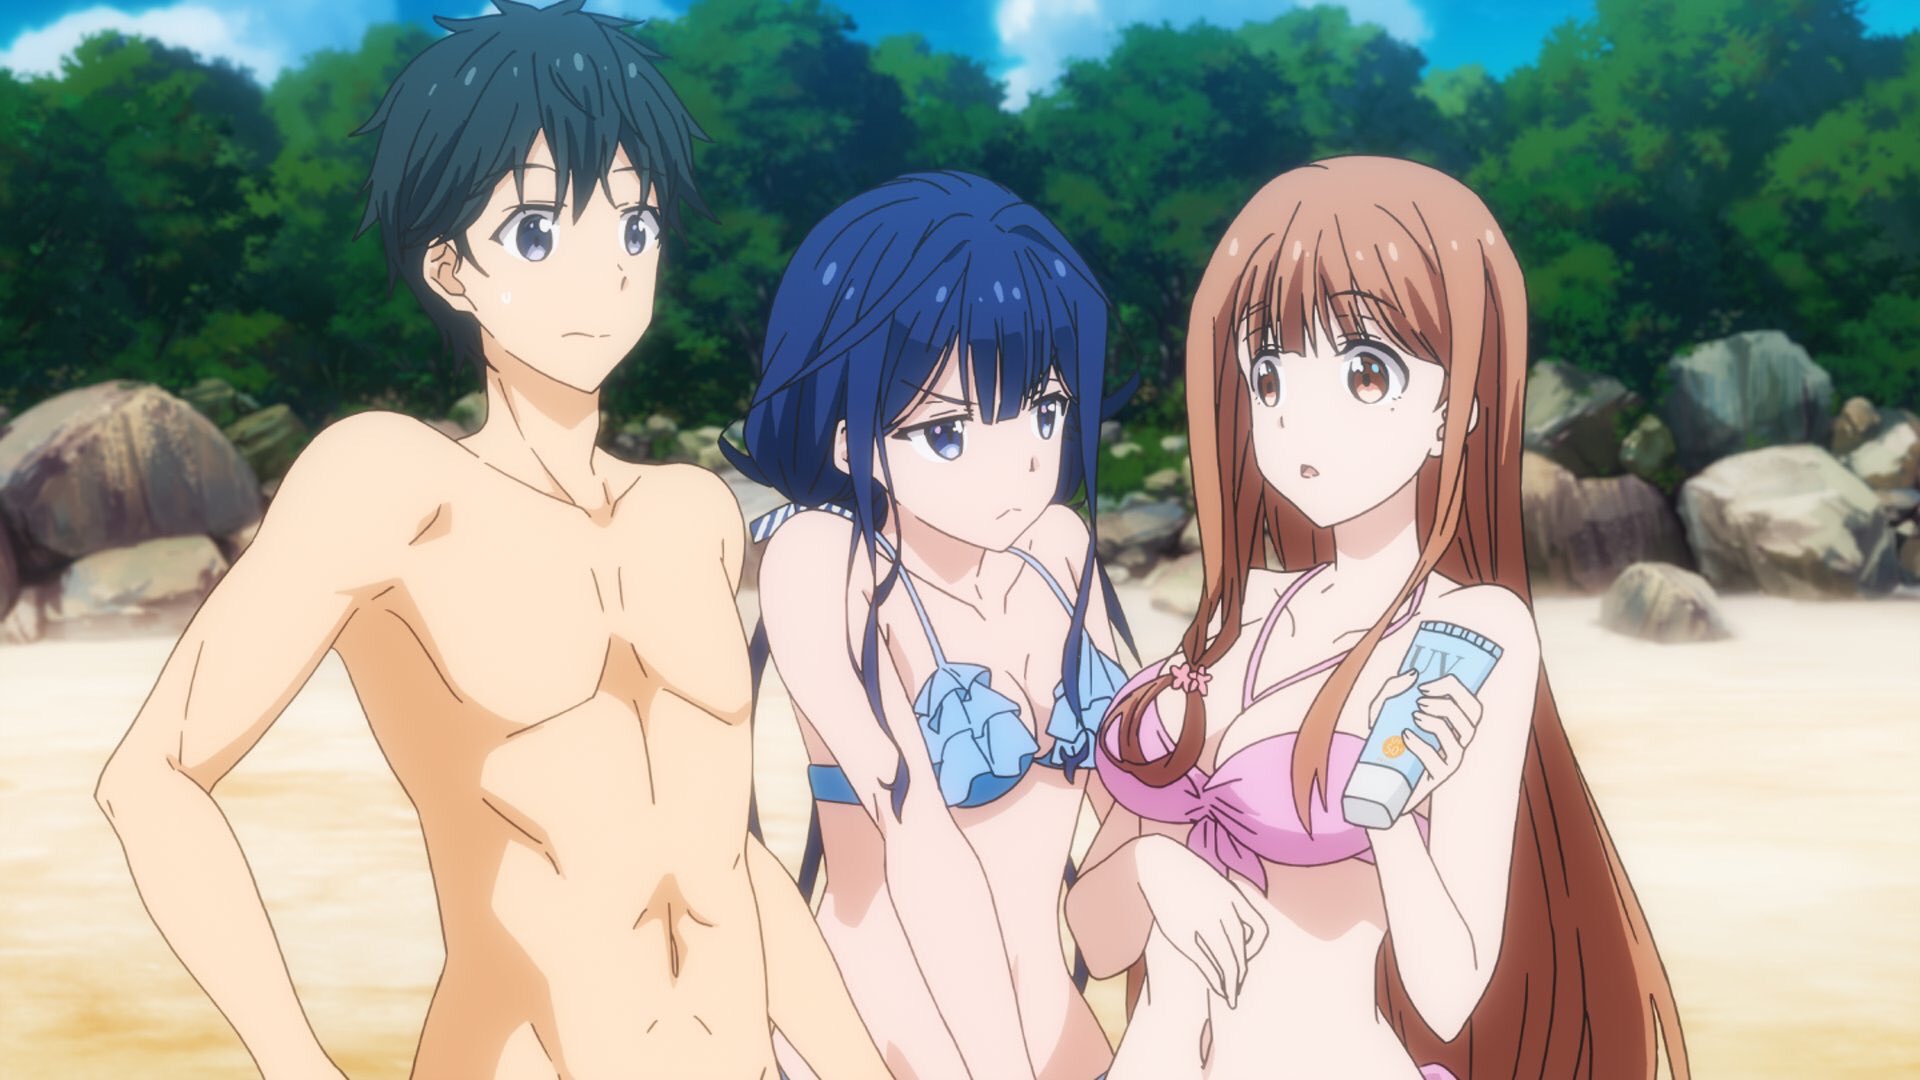 16 Anime Beach Episodes That Came Out Of Nowhere